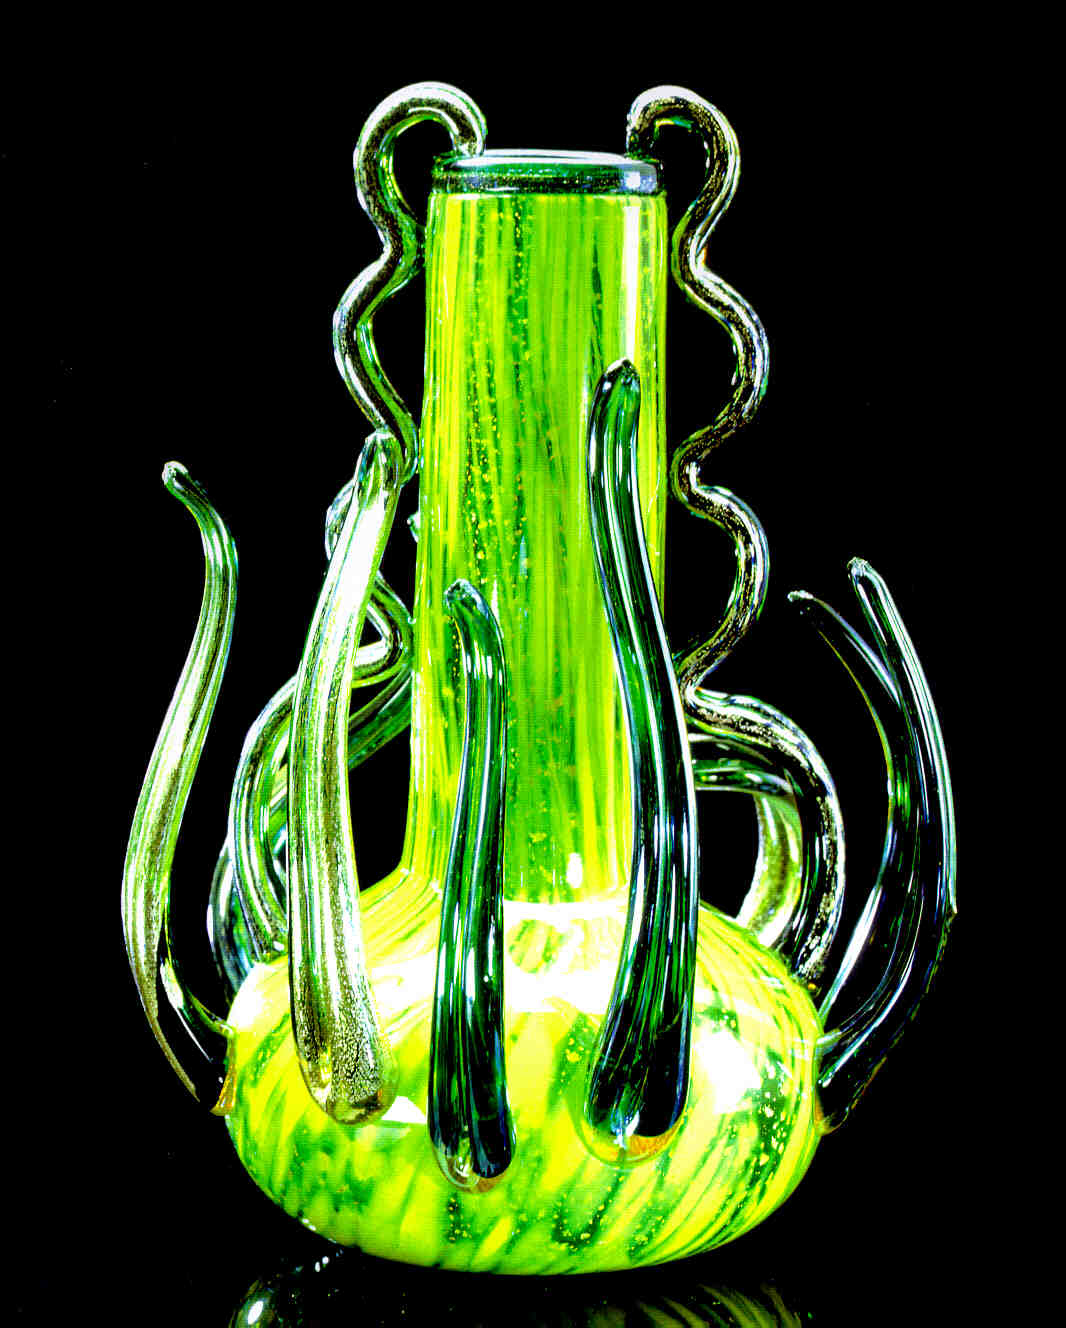  Dale Chihuly,  Moss Green Piccolo Venetian with Two Coil Handles and Prongs&nbsp; (1994, glass, 9 x 7 x 7 inches) 